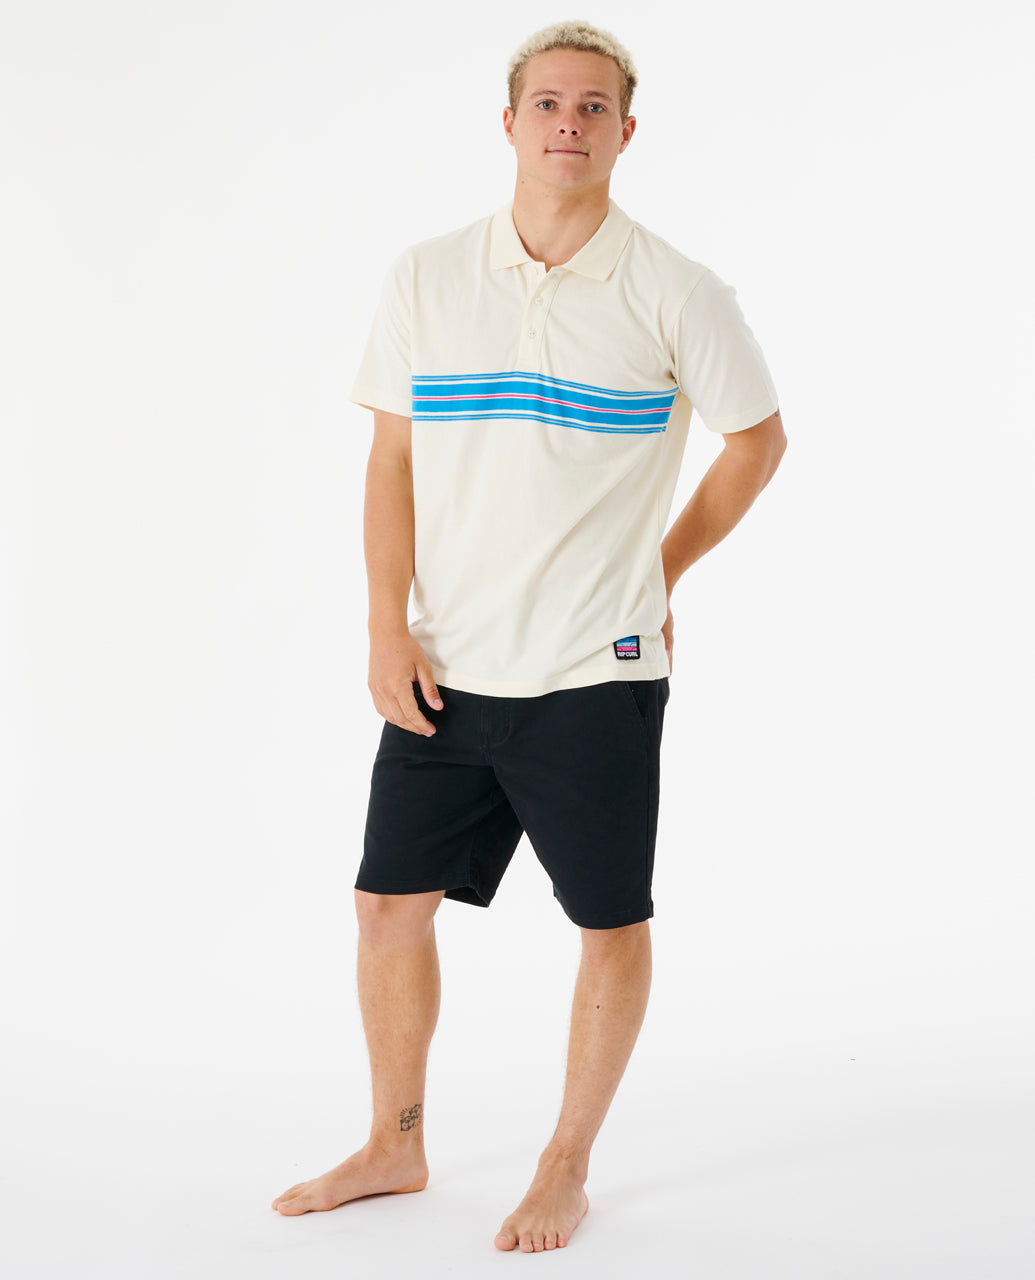 SURF REVIVAL POLO